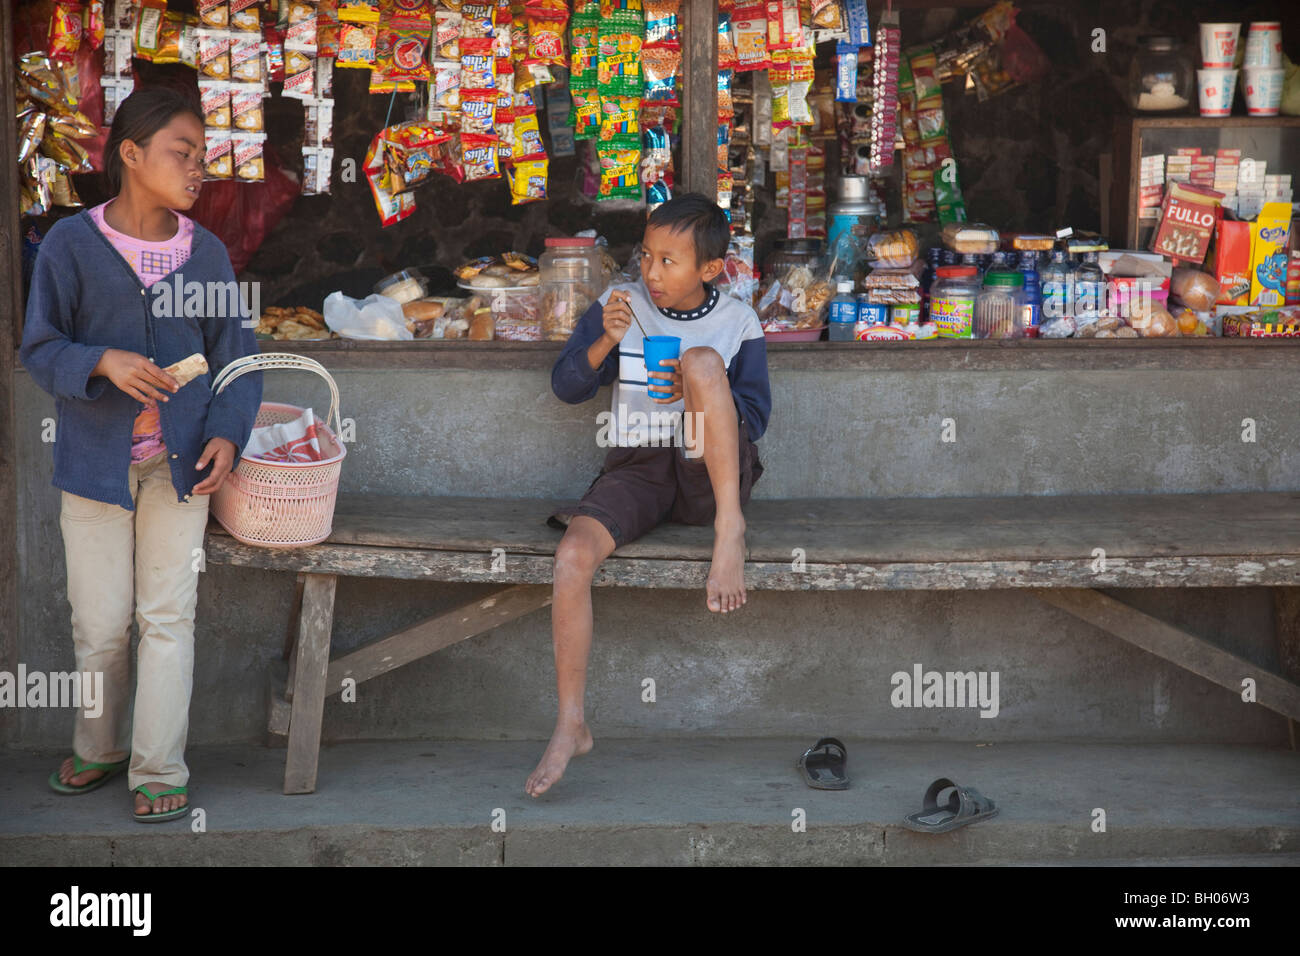 A Bali open market provisions shop with two young people buying goods Stock Photo